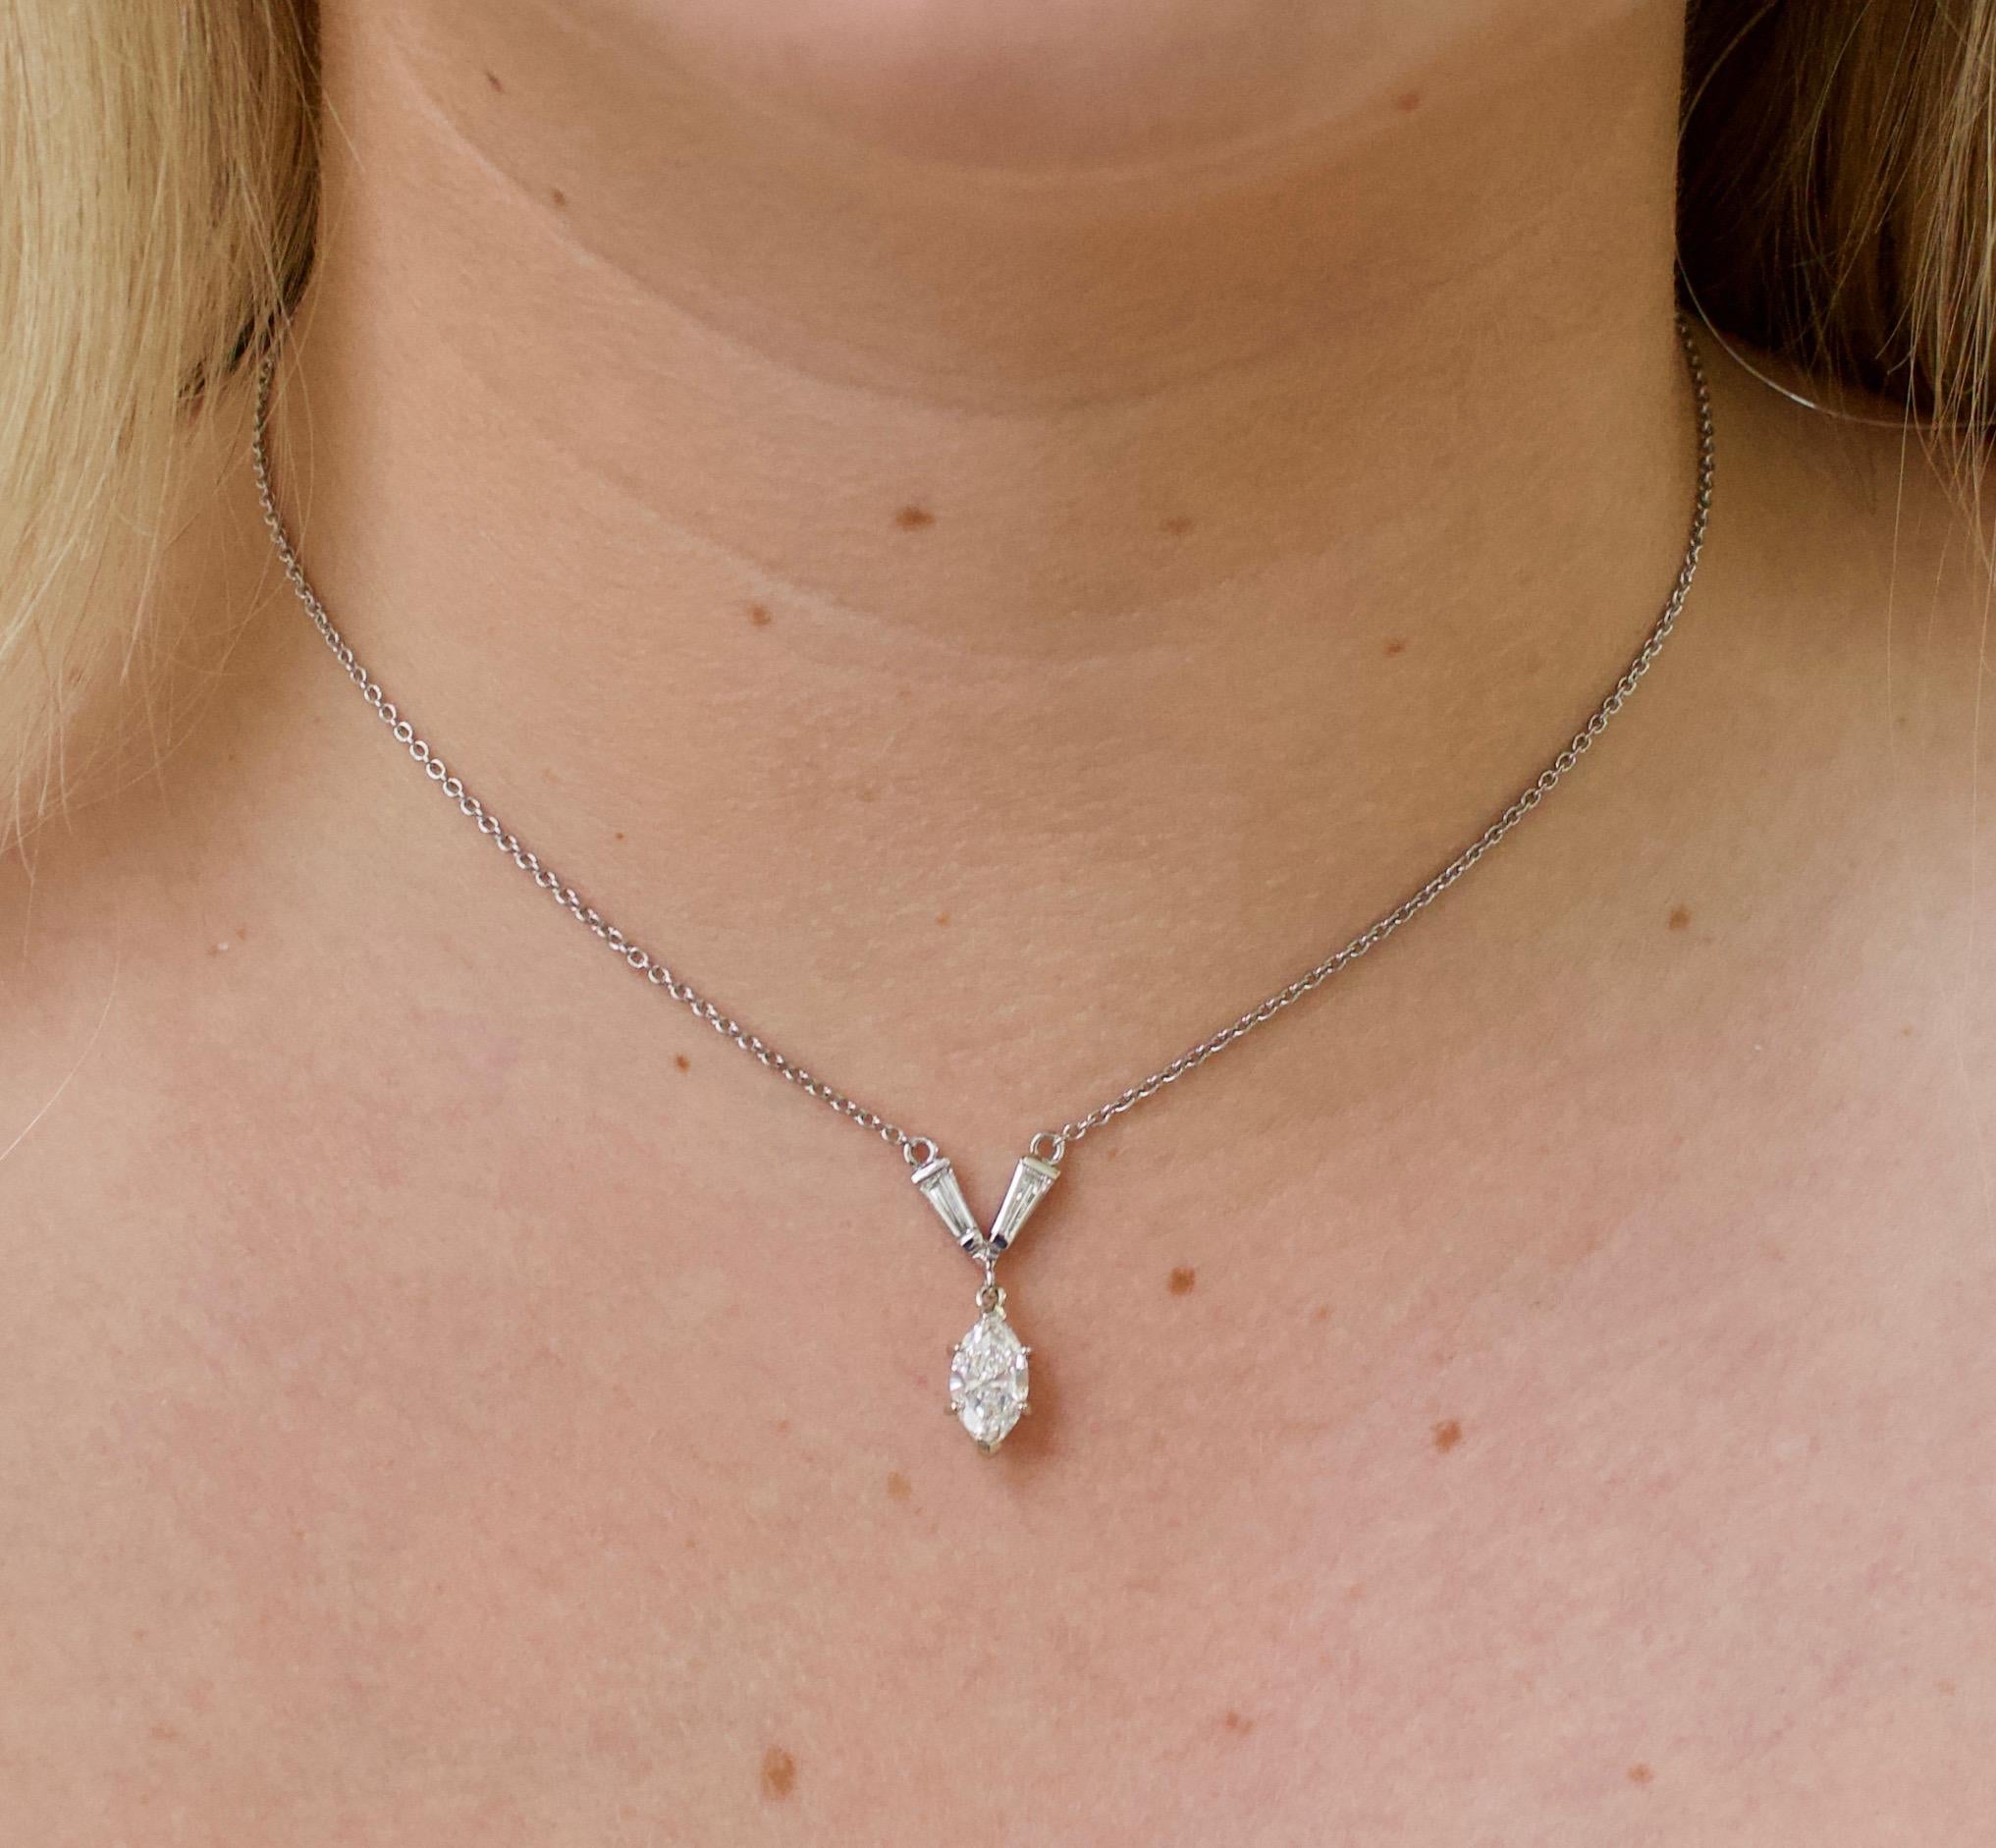 Classic Marquise Diamond Drop Necklace in Platinum GIA E SI1

Introducing the exquisite Platinum Diamond Necklace, a true embodiment of elegance and luxury. Crafted with the finest materials, this necklace is a stunning piece that will captivate